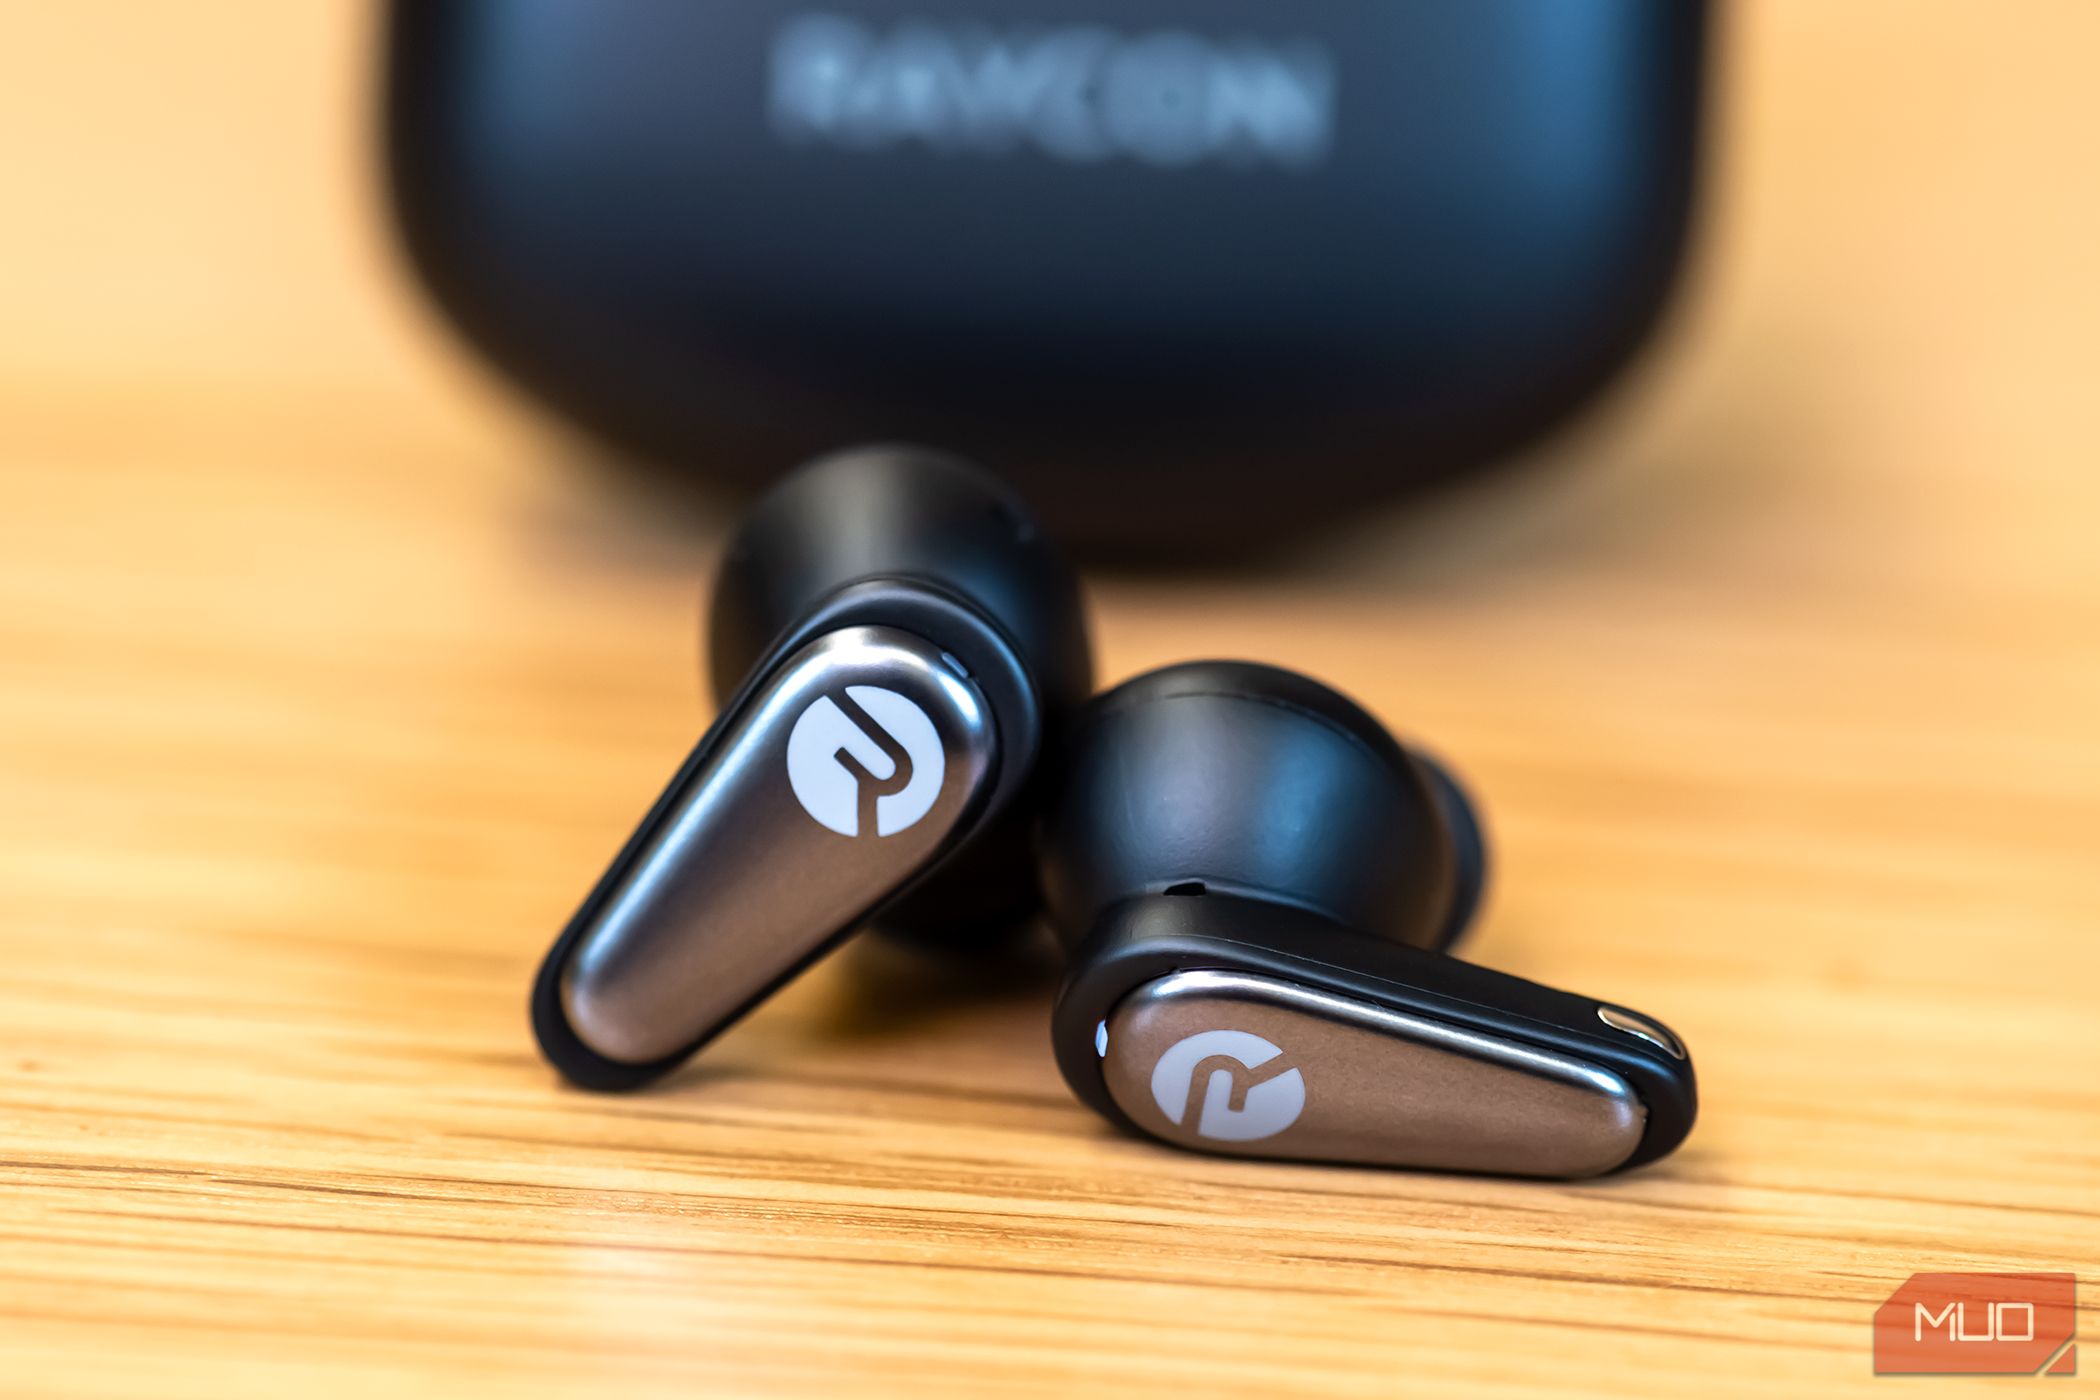 Raycon logo on the Raycon Everyday Earbuds Pro